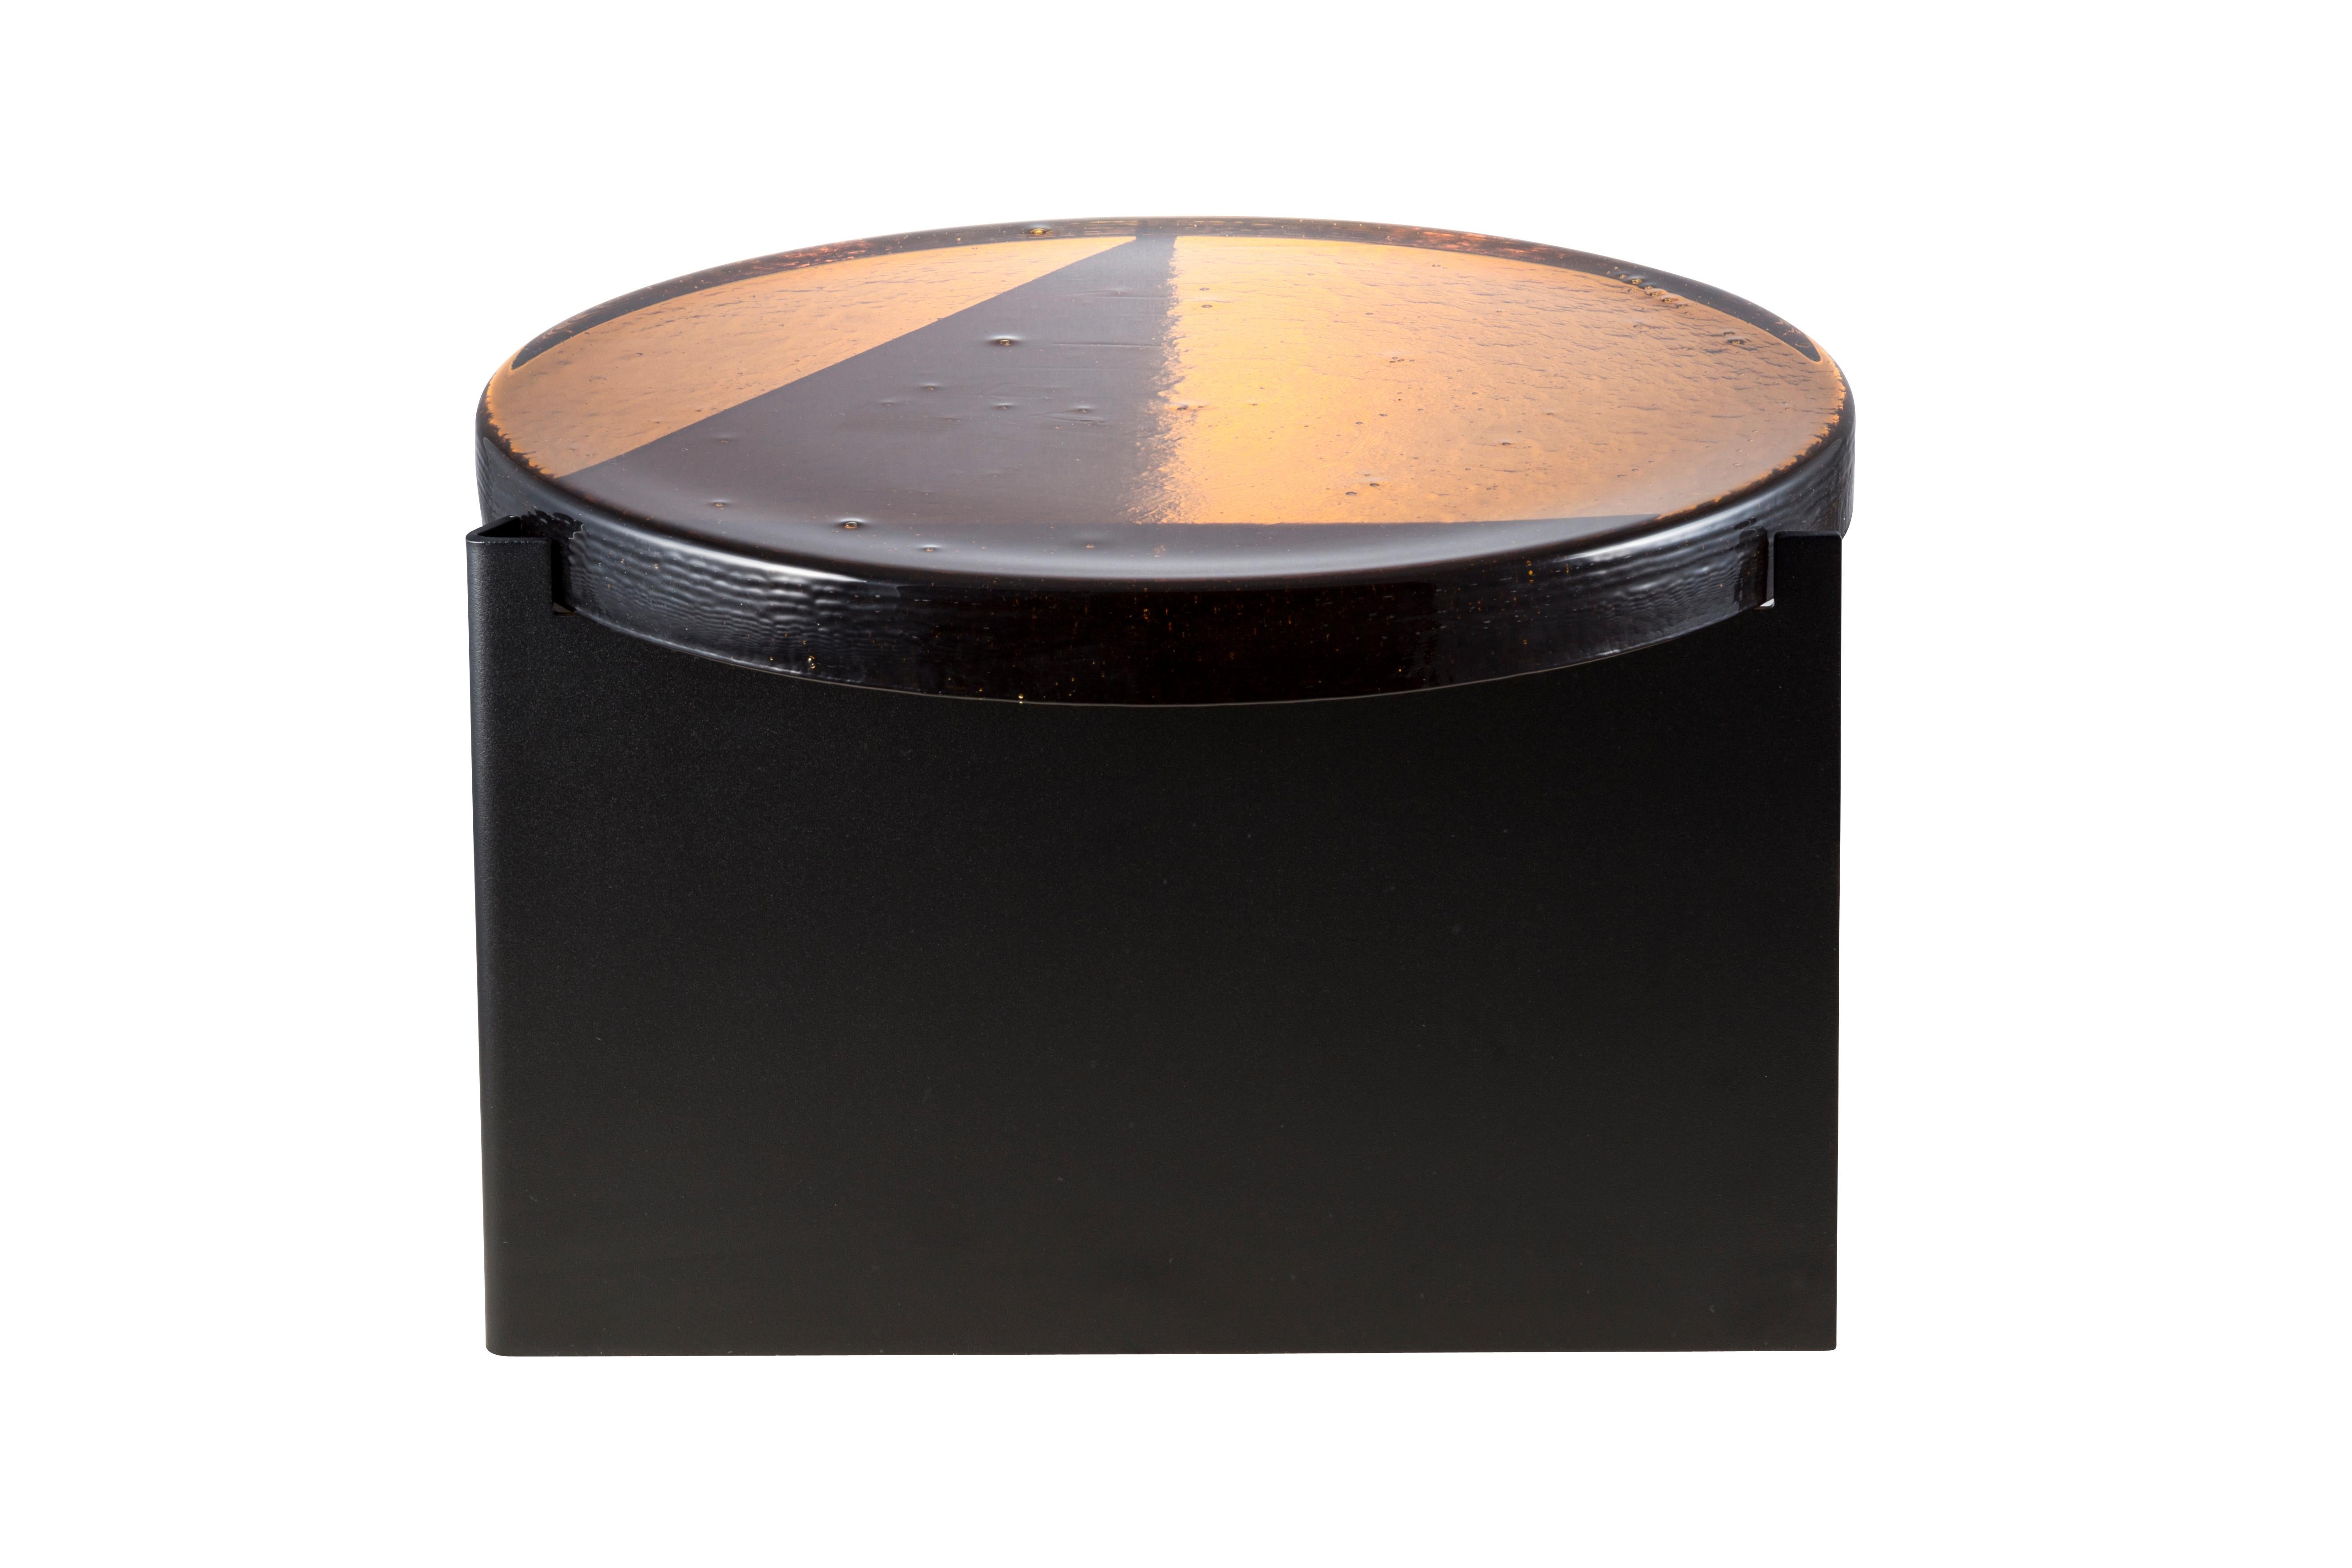 Alwa one big amber black coffee table by Pulpo
Dimensions: D56 x H35 cm
Materials: casted glass; powder coated steel 

Also available in different finishes. 

Normally, glass is regarded as being lightweight with sharp edges. In contrast,